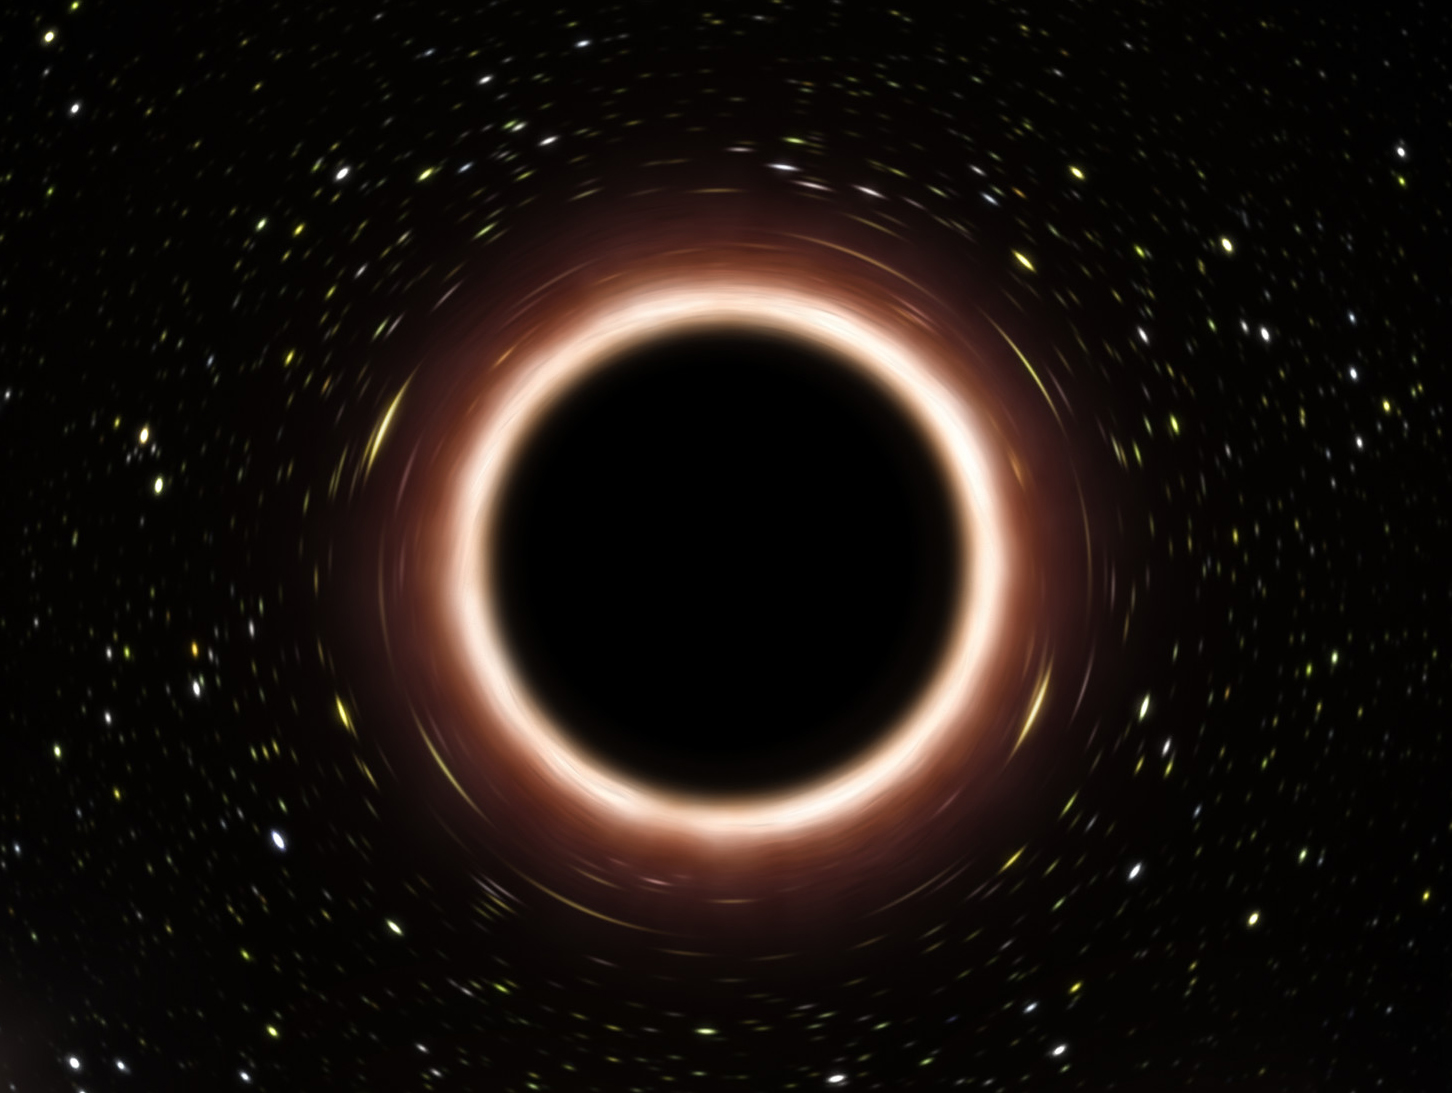 The brightest object in the universe is a black hole